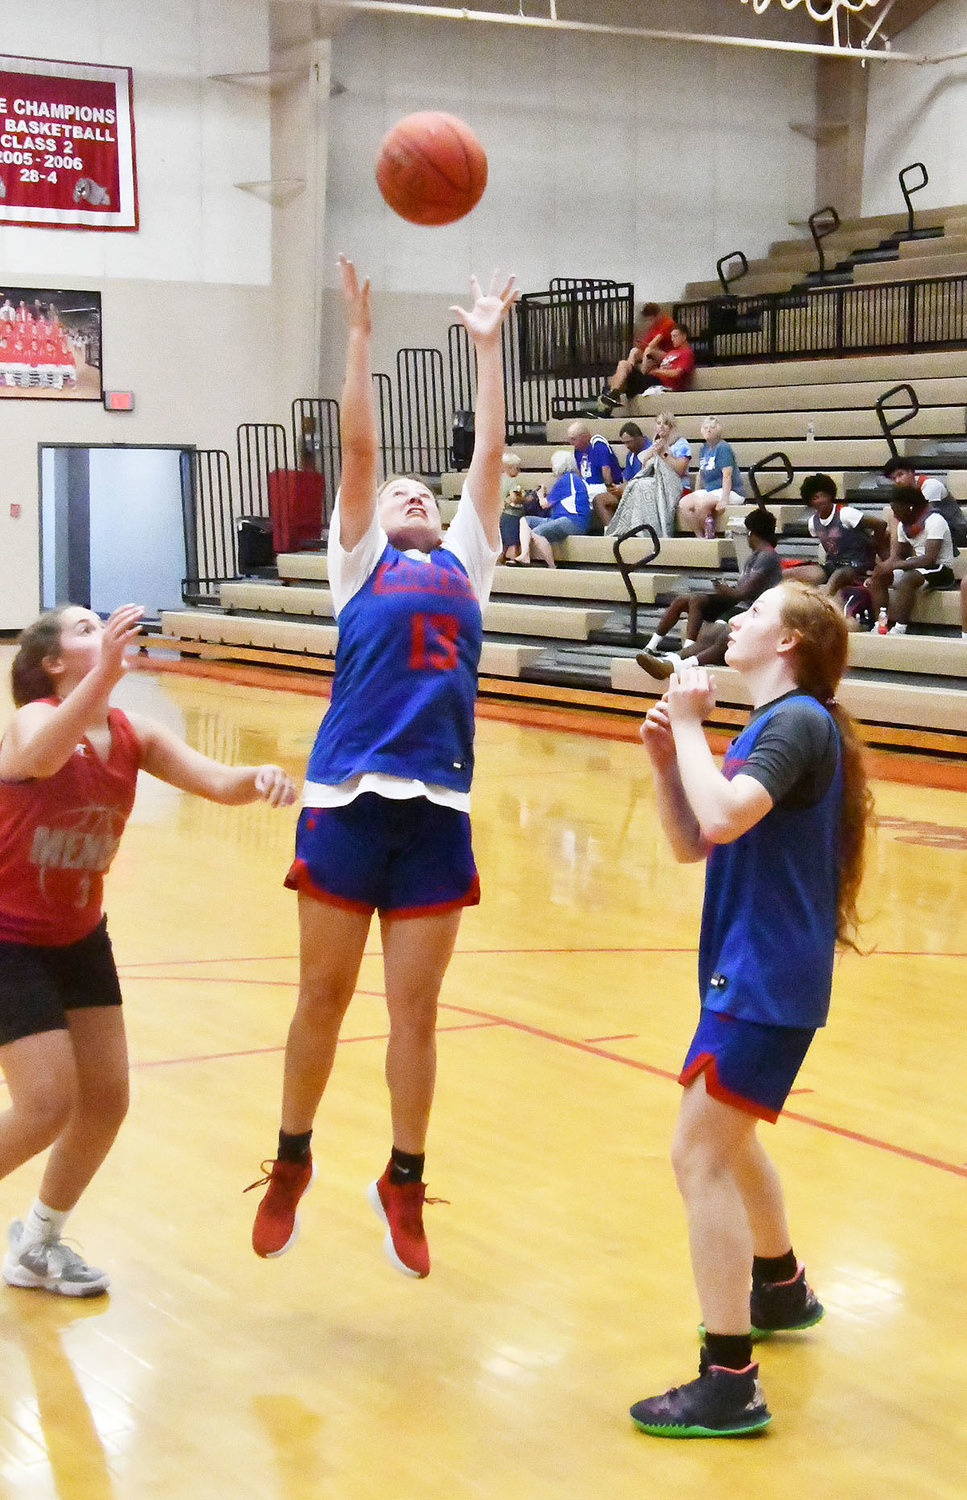 Elizabeth Reisenauer of Moberly grabs a rebound while Haley Baker looks on during the scrimmage versus Mexico.